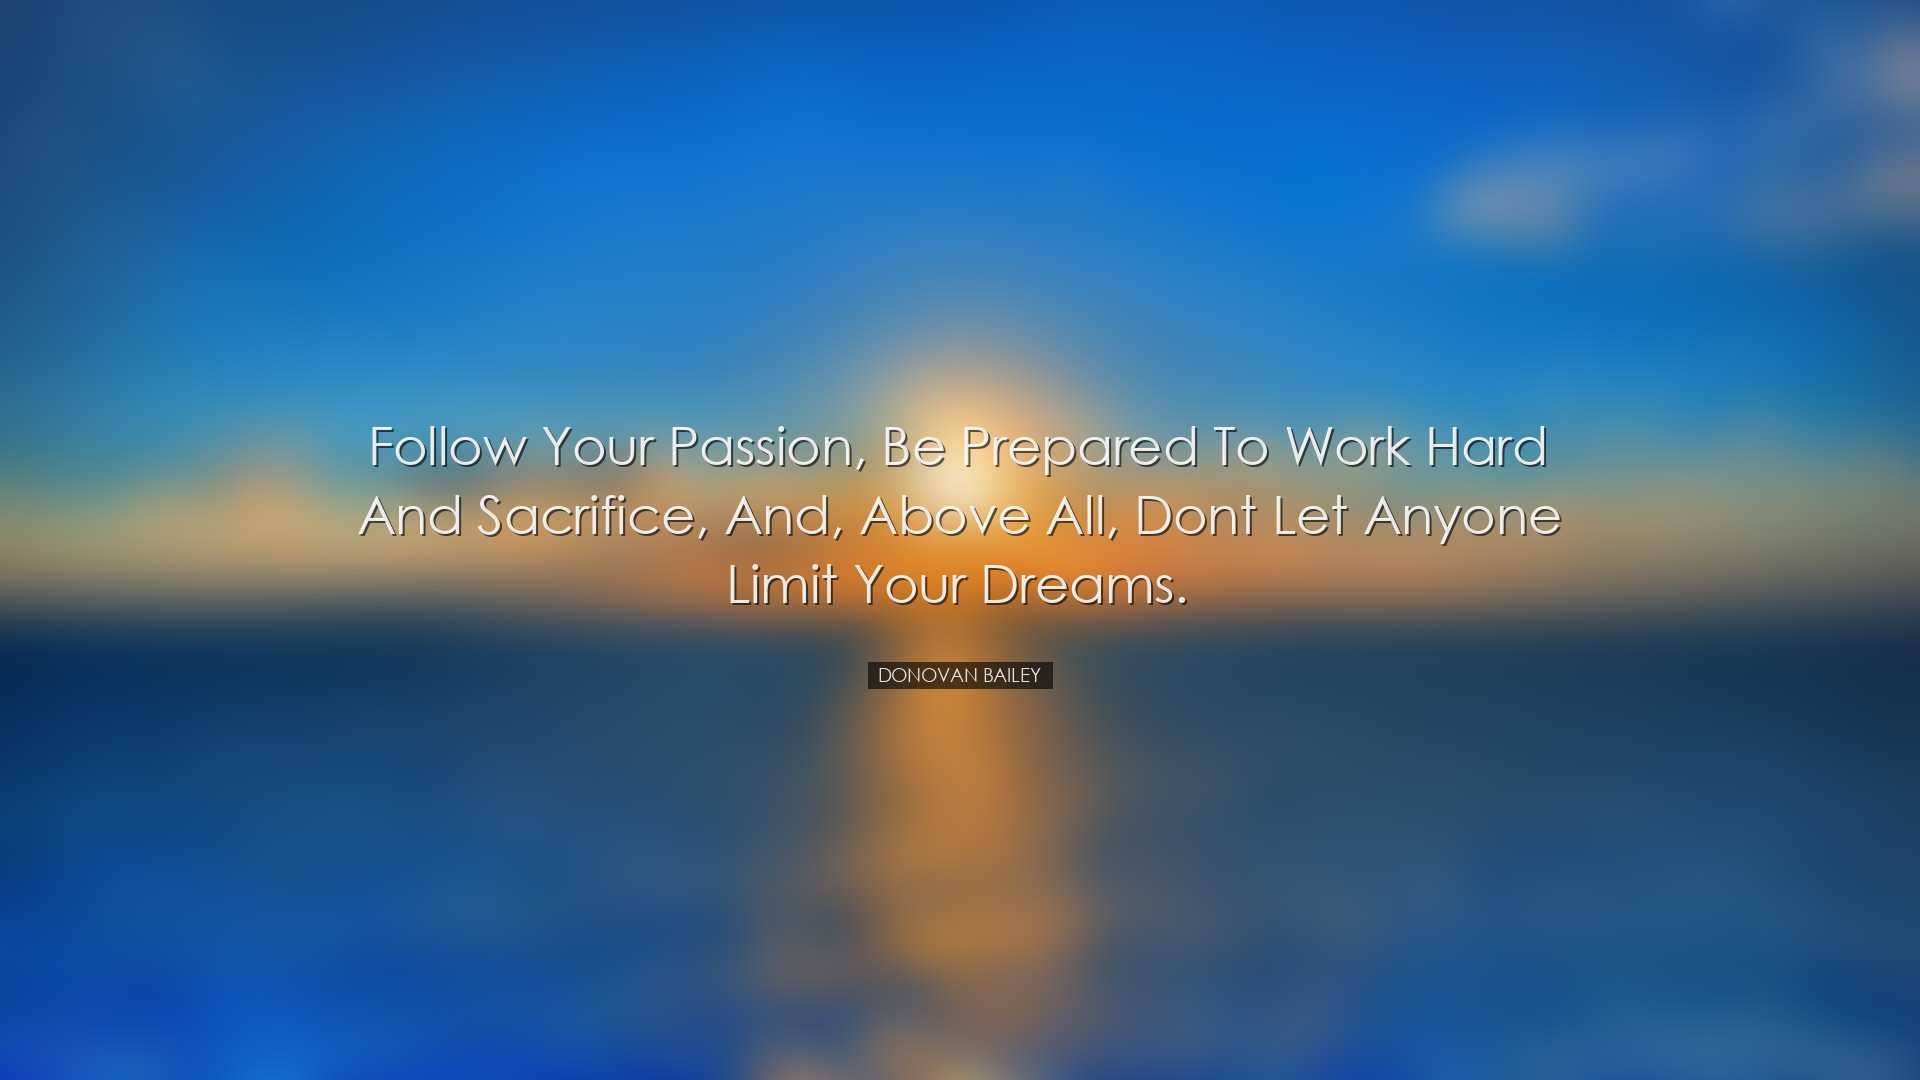 Follow your passion, be prepared to work hard and sacrifice, and,